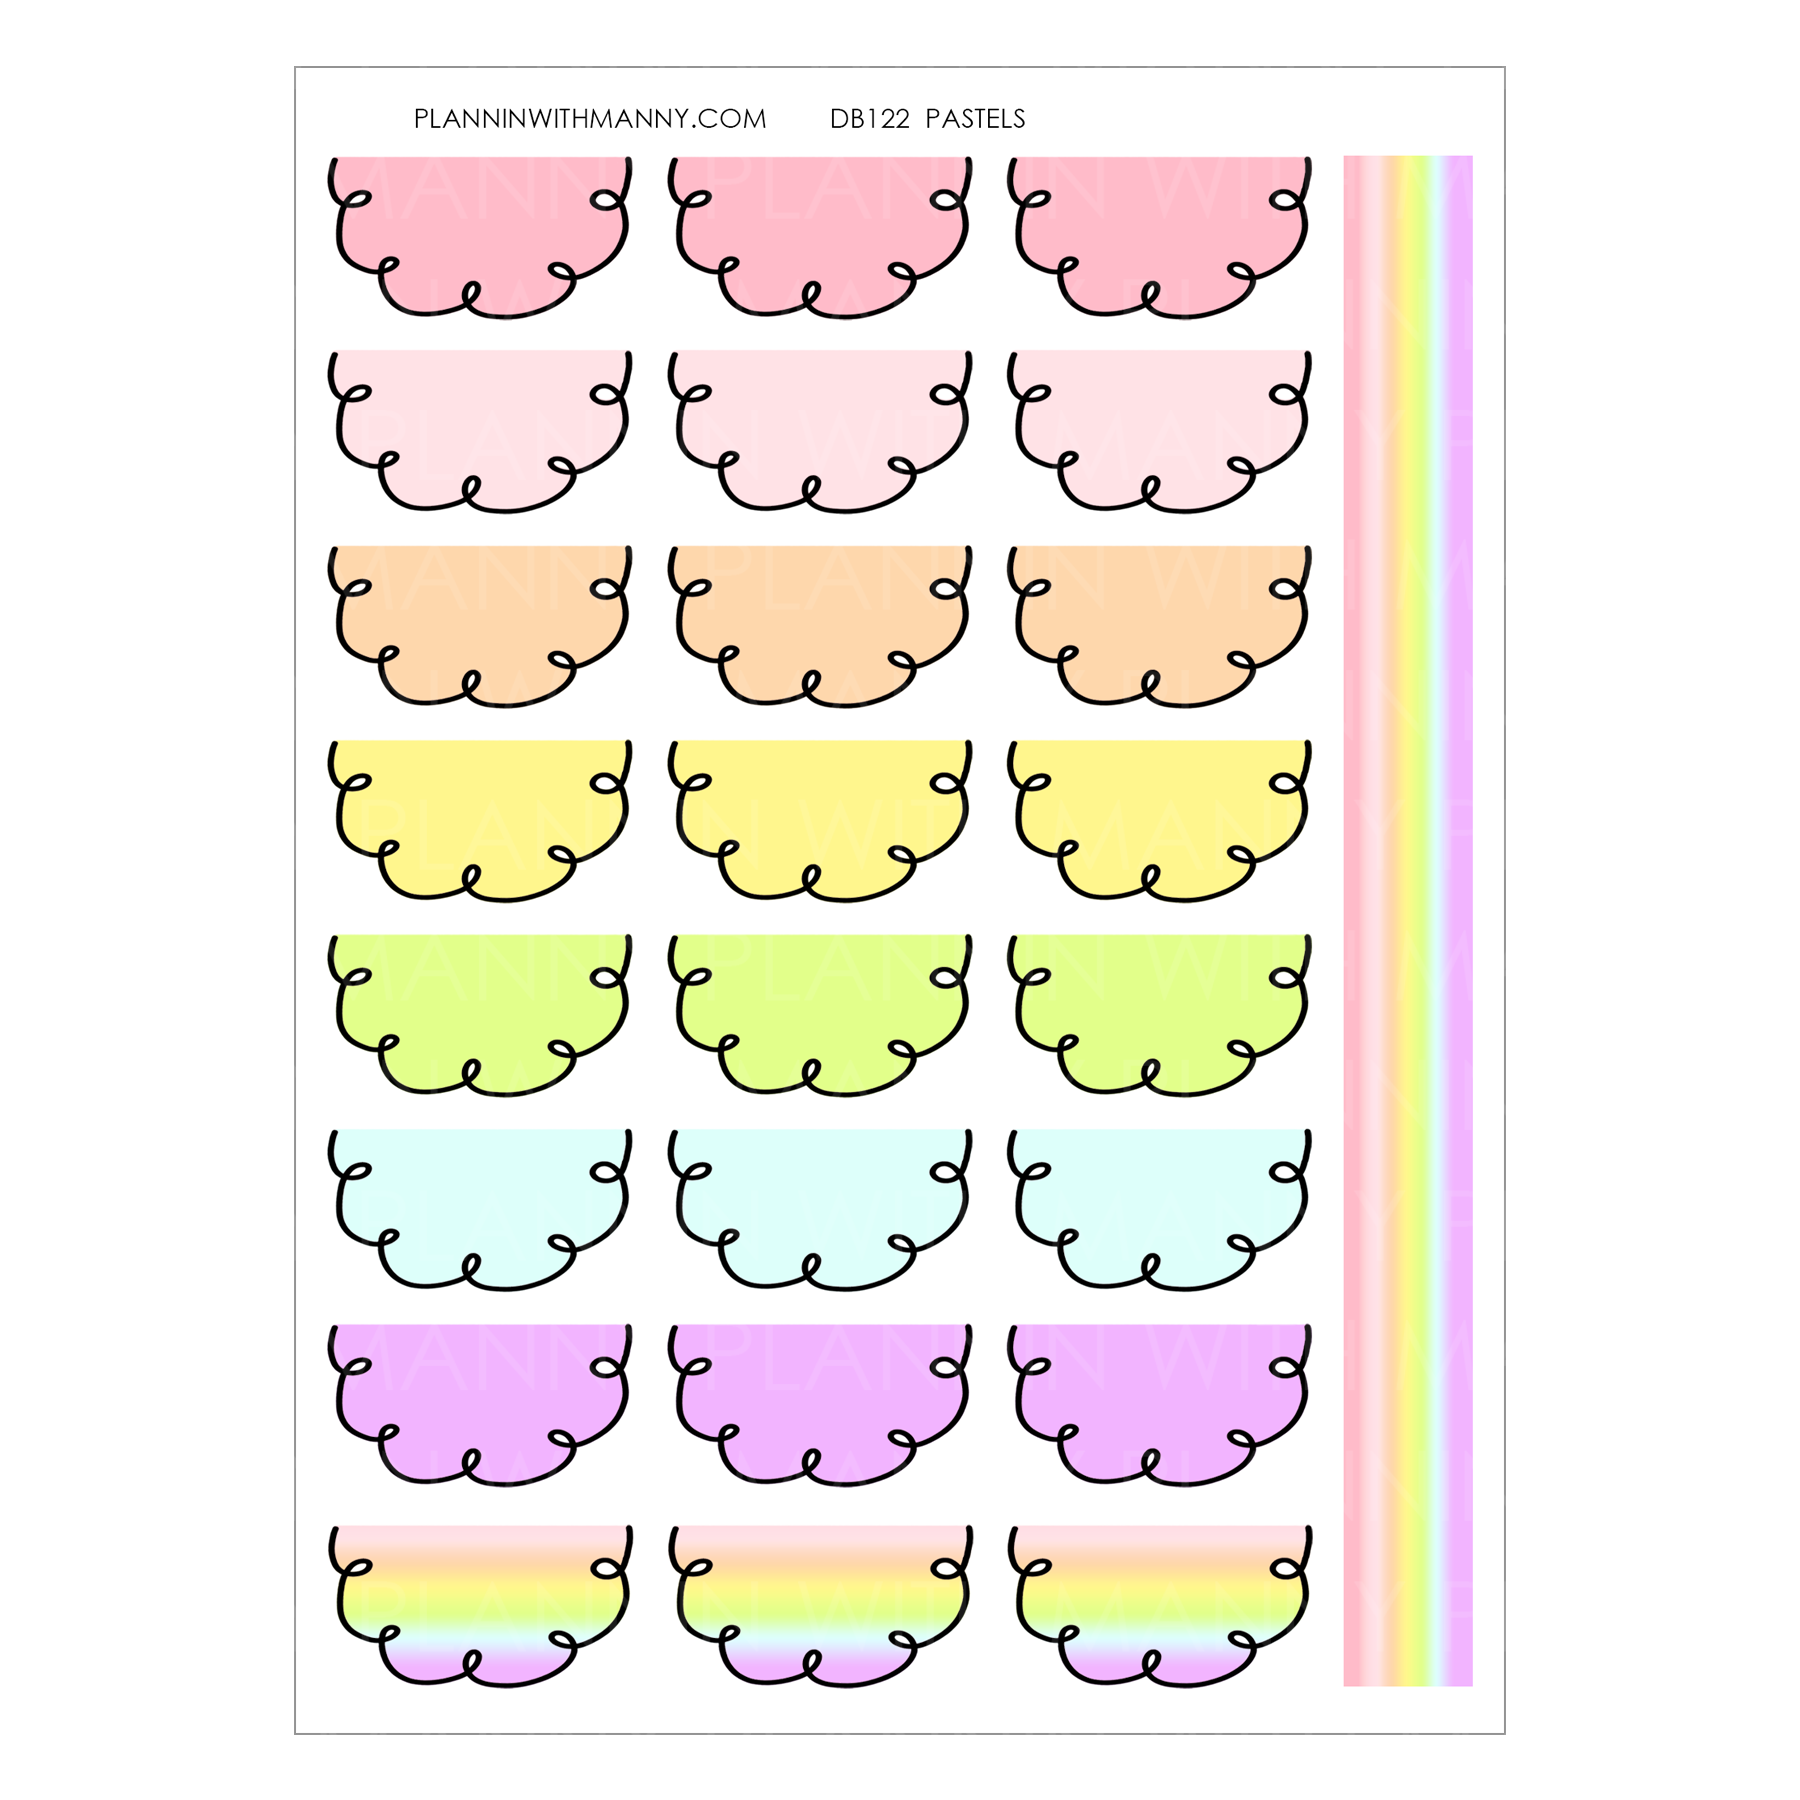 DB122 1.3" PASTELS Doodle Half Circle Planner Stickers